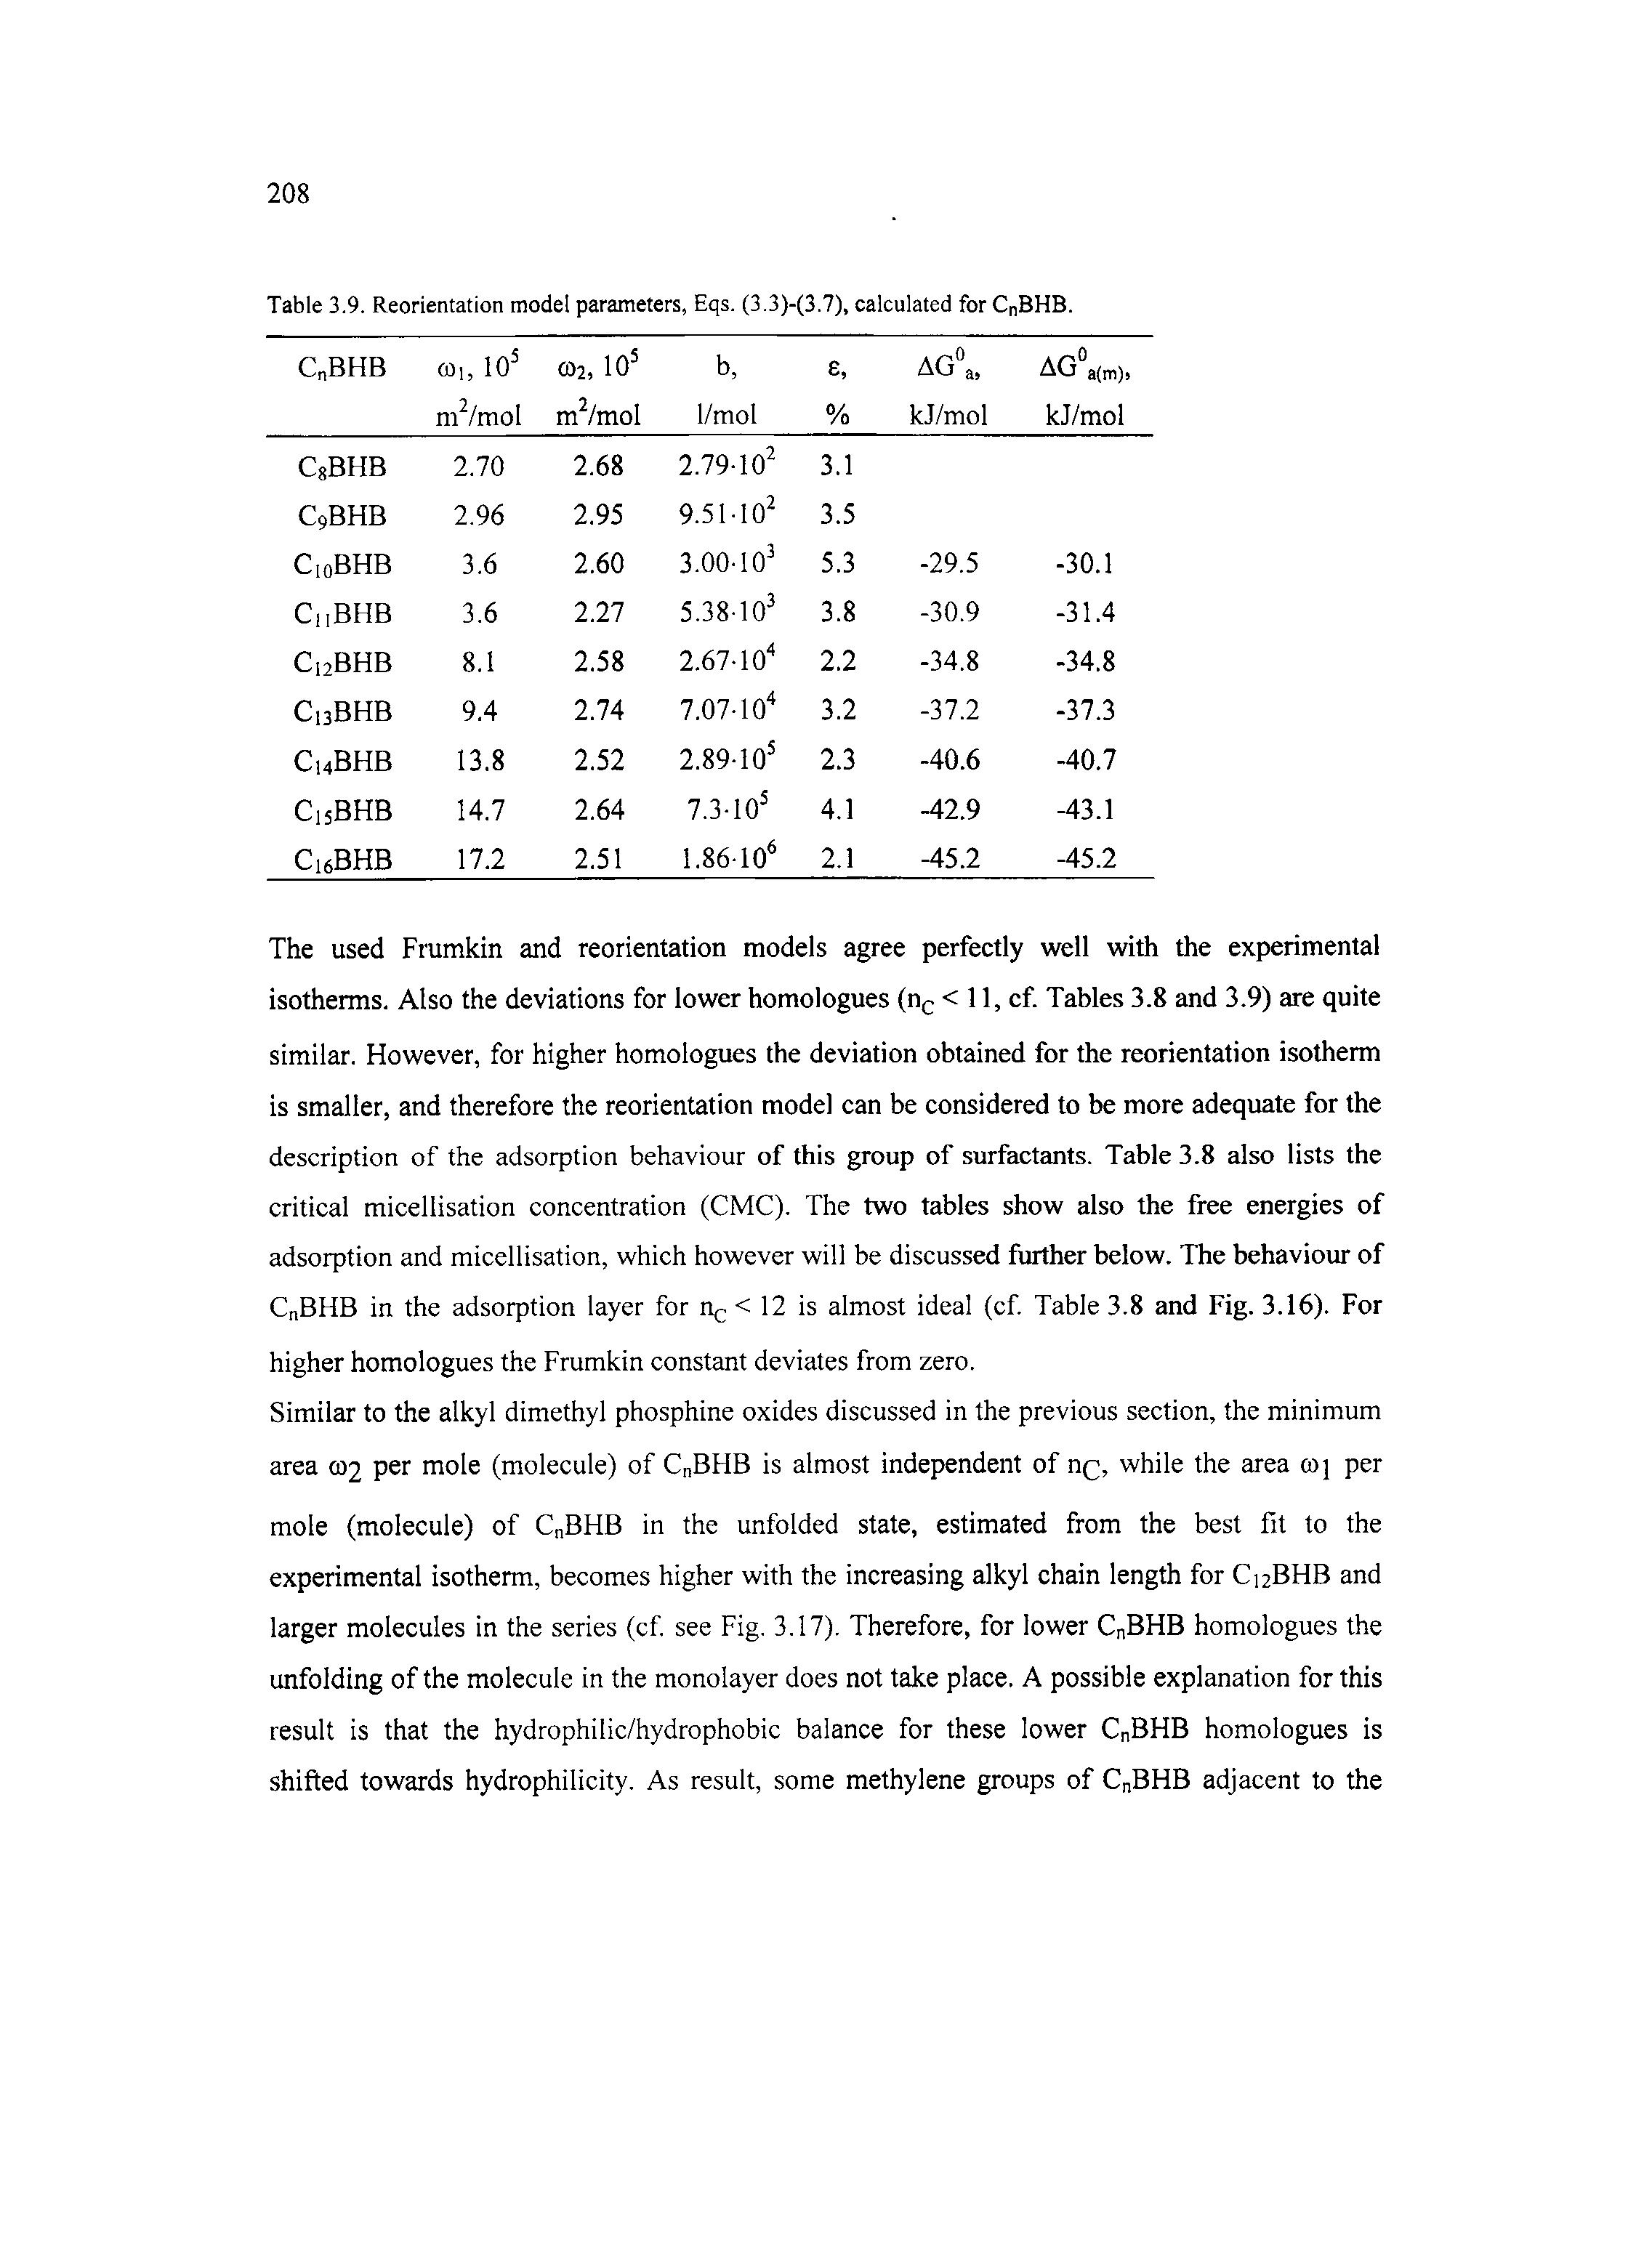 Table 3.9. Reorientation model parameters, Eqs. (3.3)-(3.7), calculated for CnBHB.